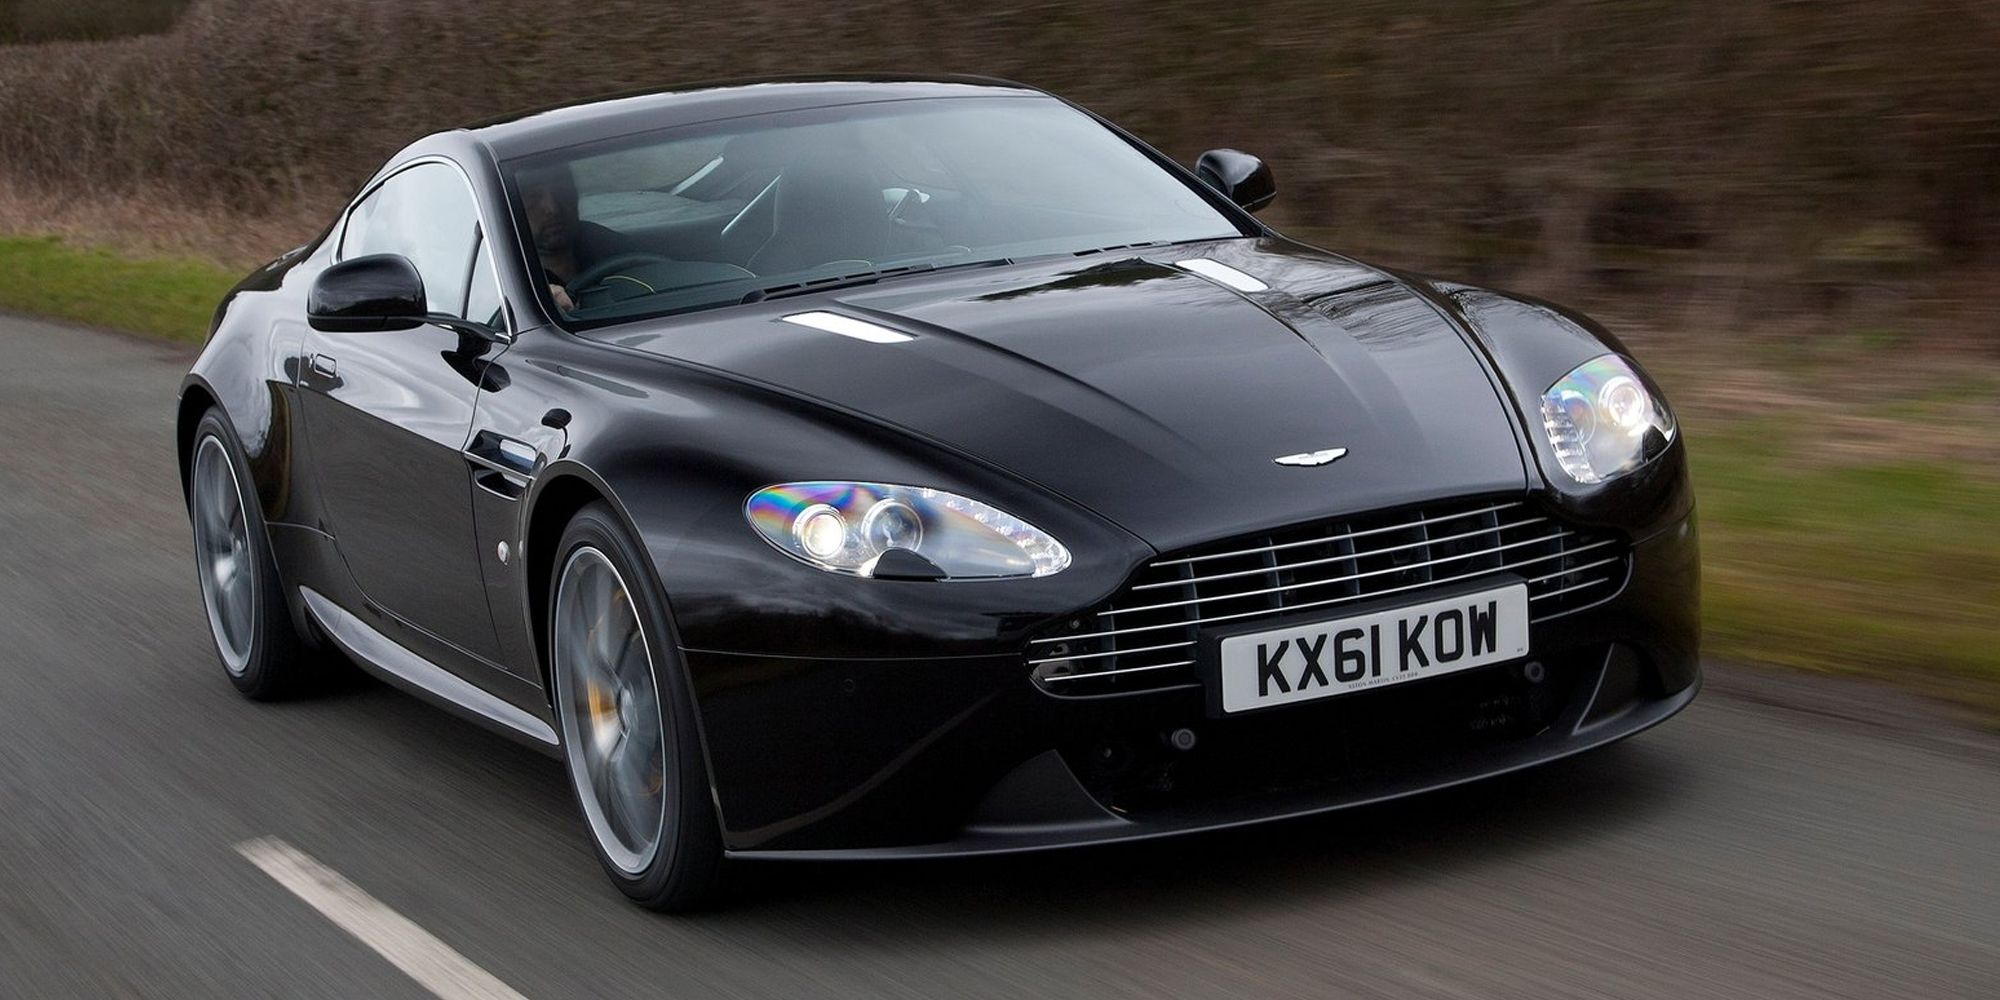 The front of a black V8 Vantage on the move